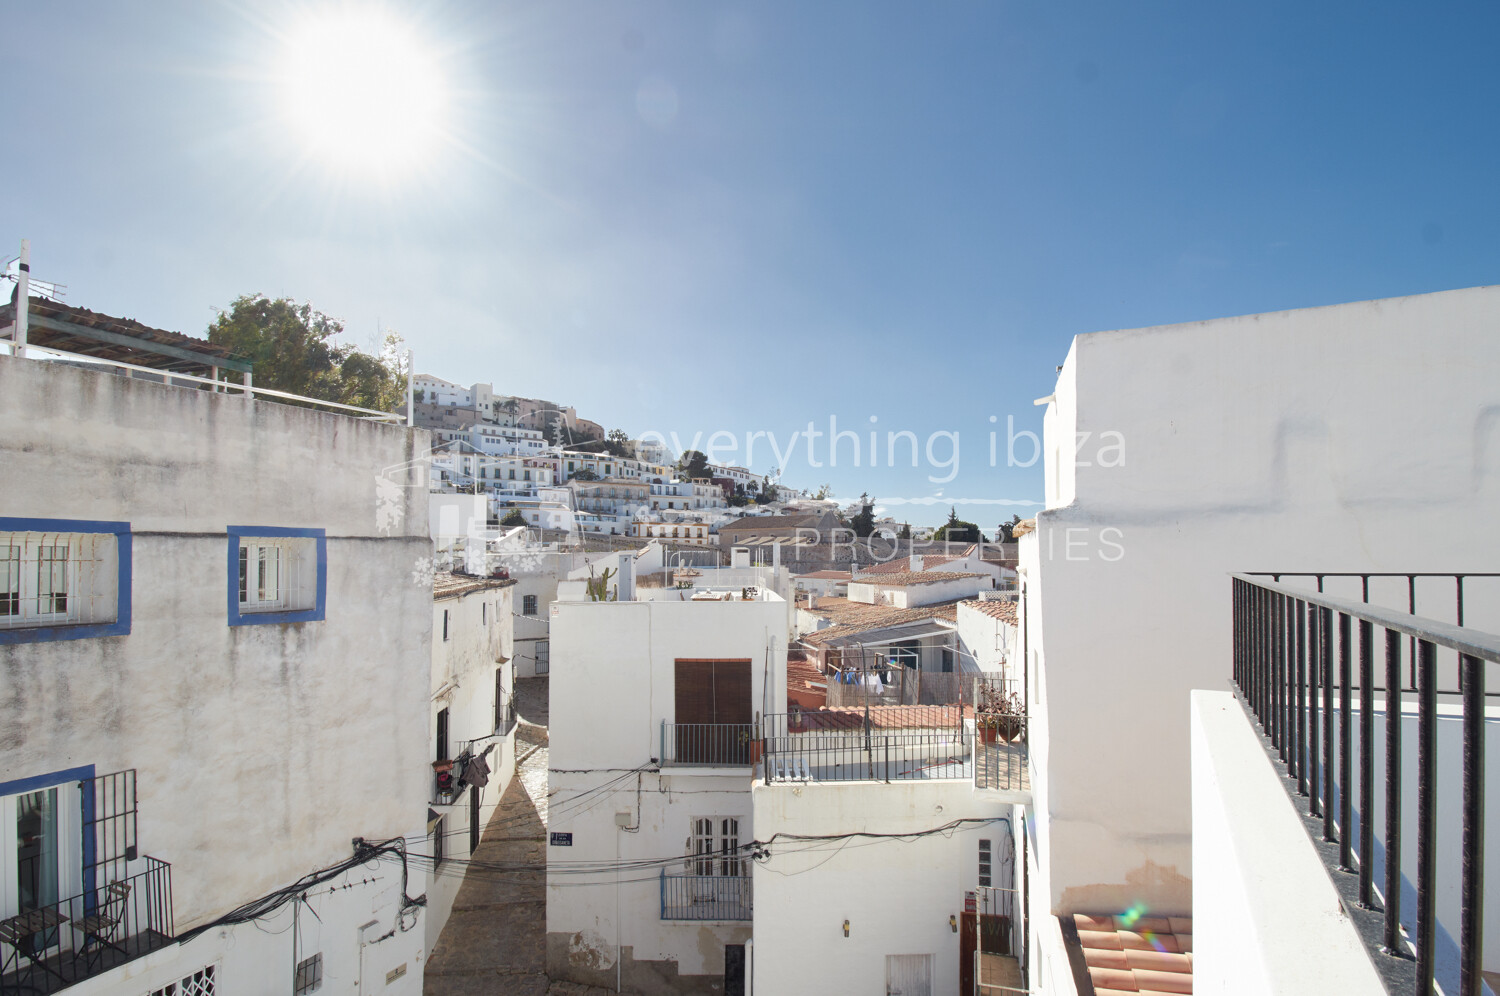 Beautifully Restored Duplex with 360º Views in the Heart of Old Ibiza Town, ref. 1679, for sale in Ibiza by everything ibiza Properties